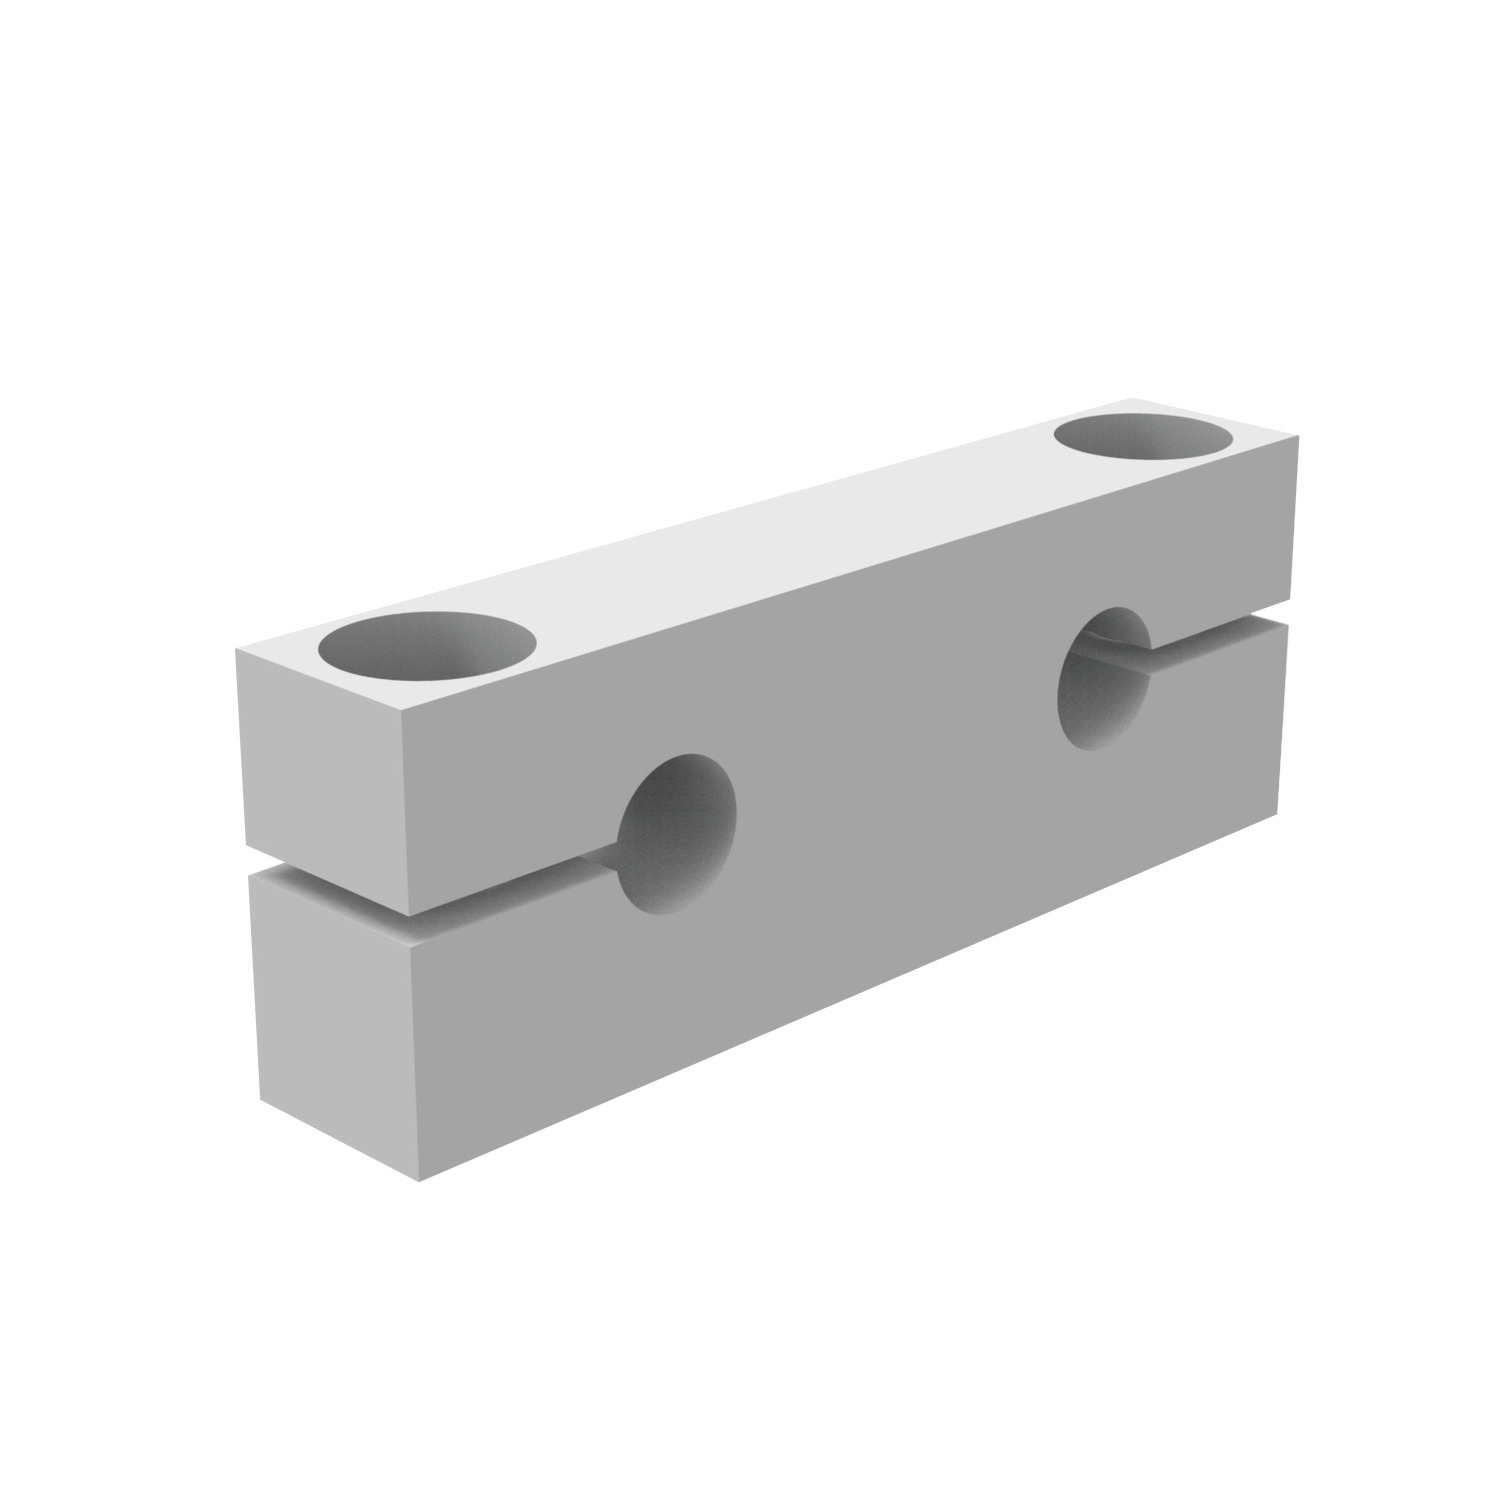 Product L1760, End Blocks for Twin Shafts clearance and tapped hole fixing / 